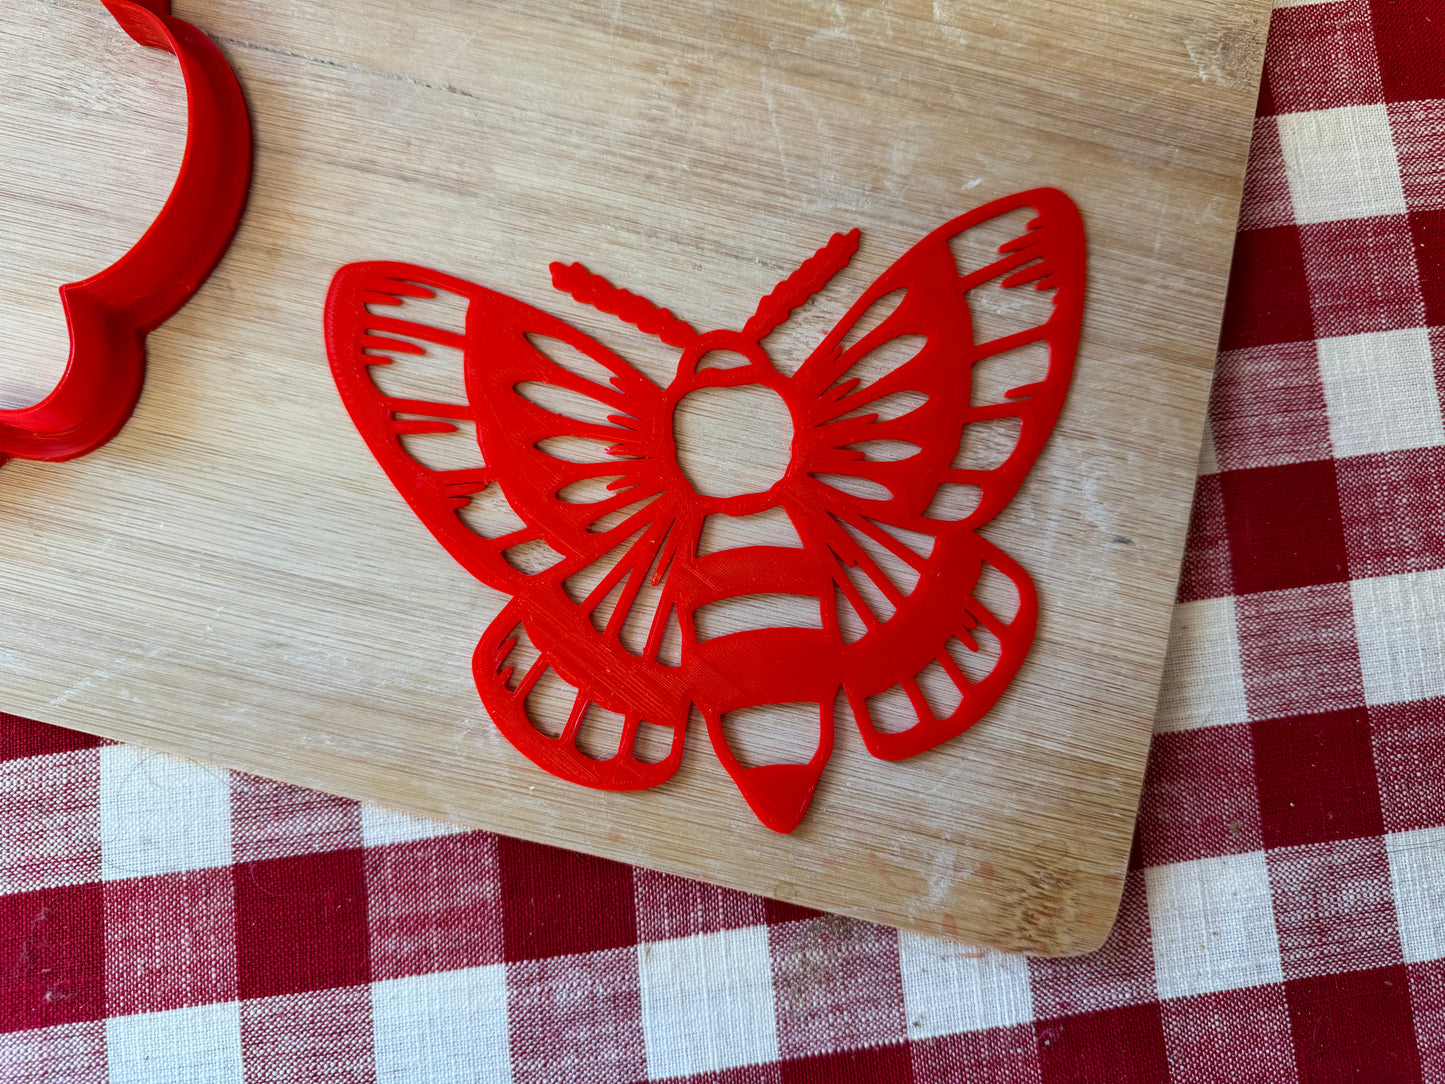 Moth 1 design, Pottery Stamp or Stencil w/ optional cutter, plastic 3d printed, multiple sizes available